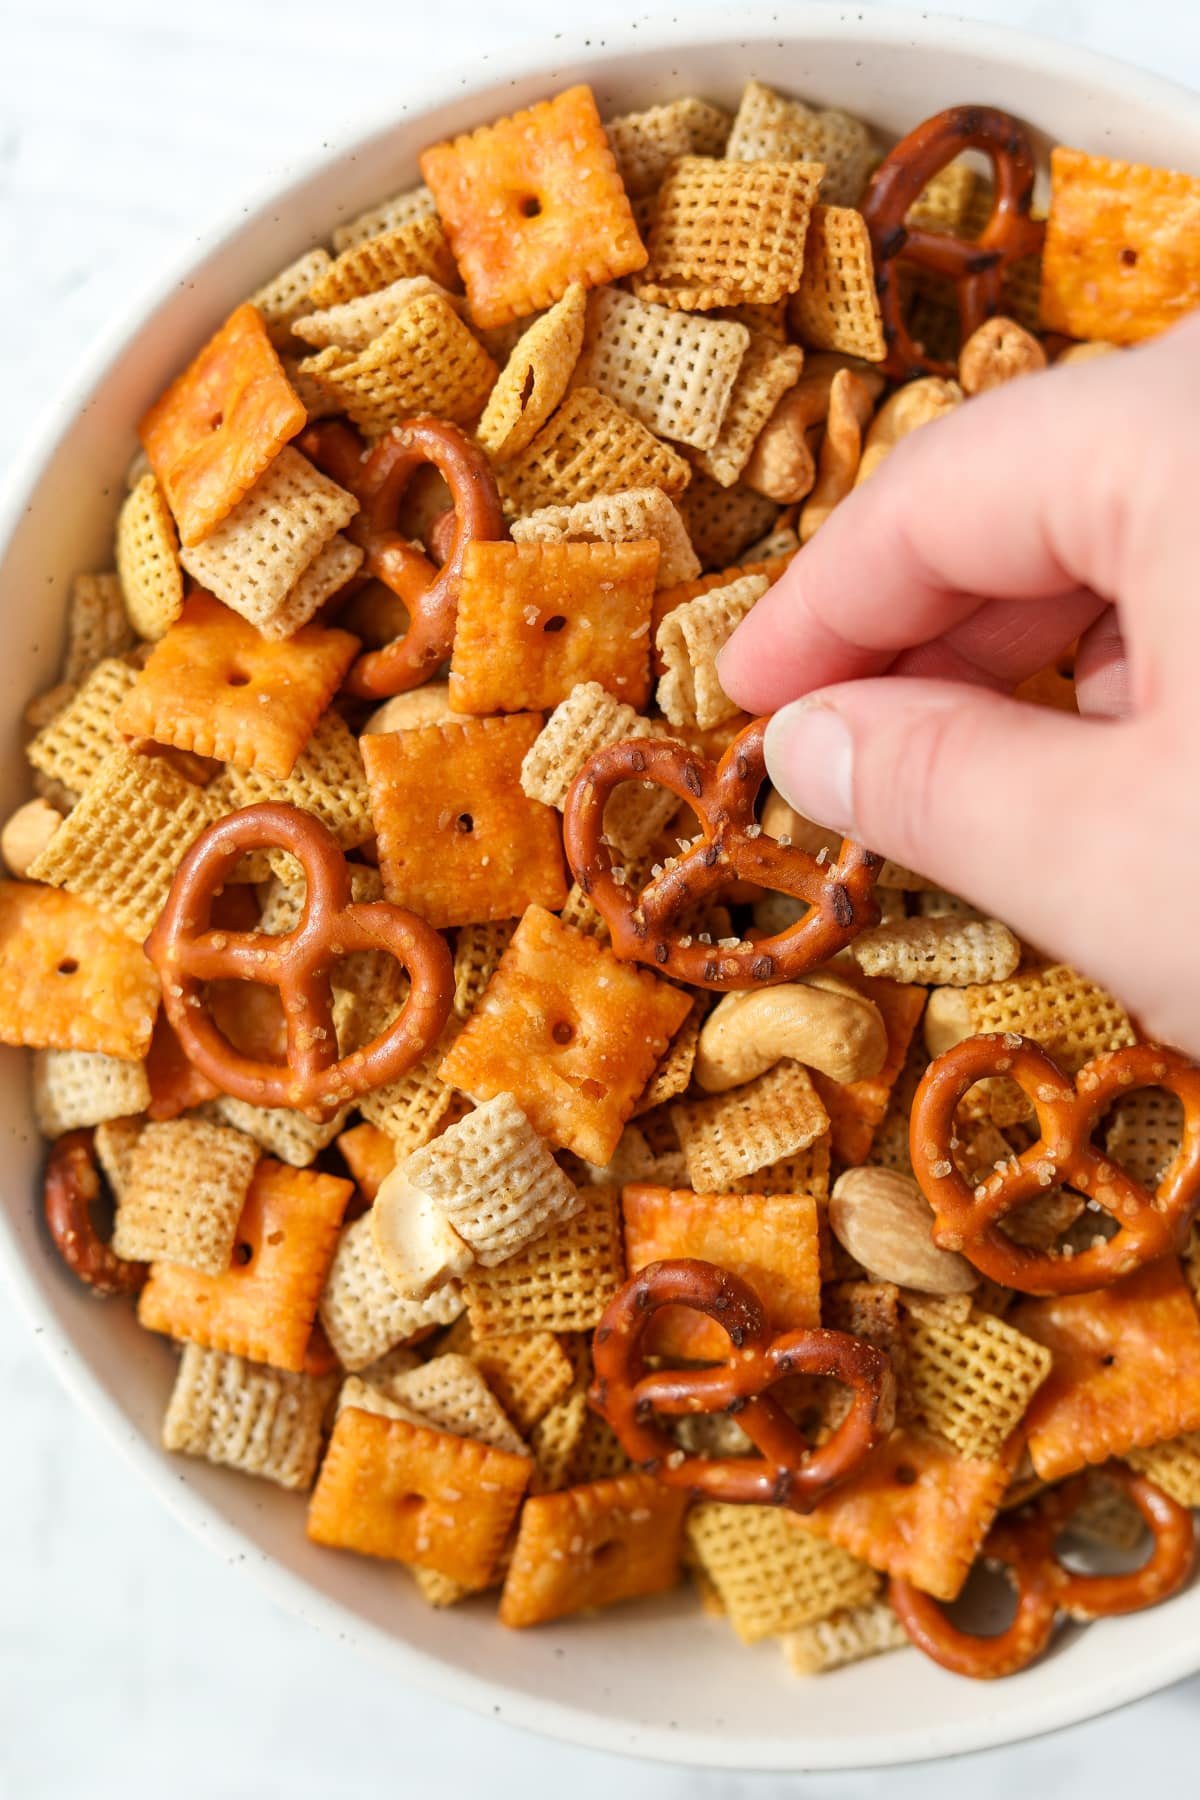 Taking a pretzel from a bowl of snack mix.